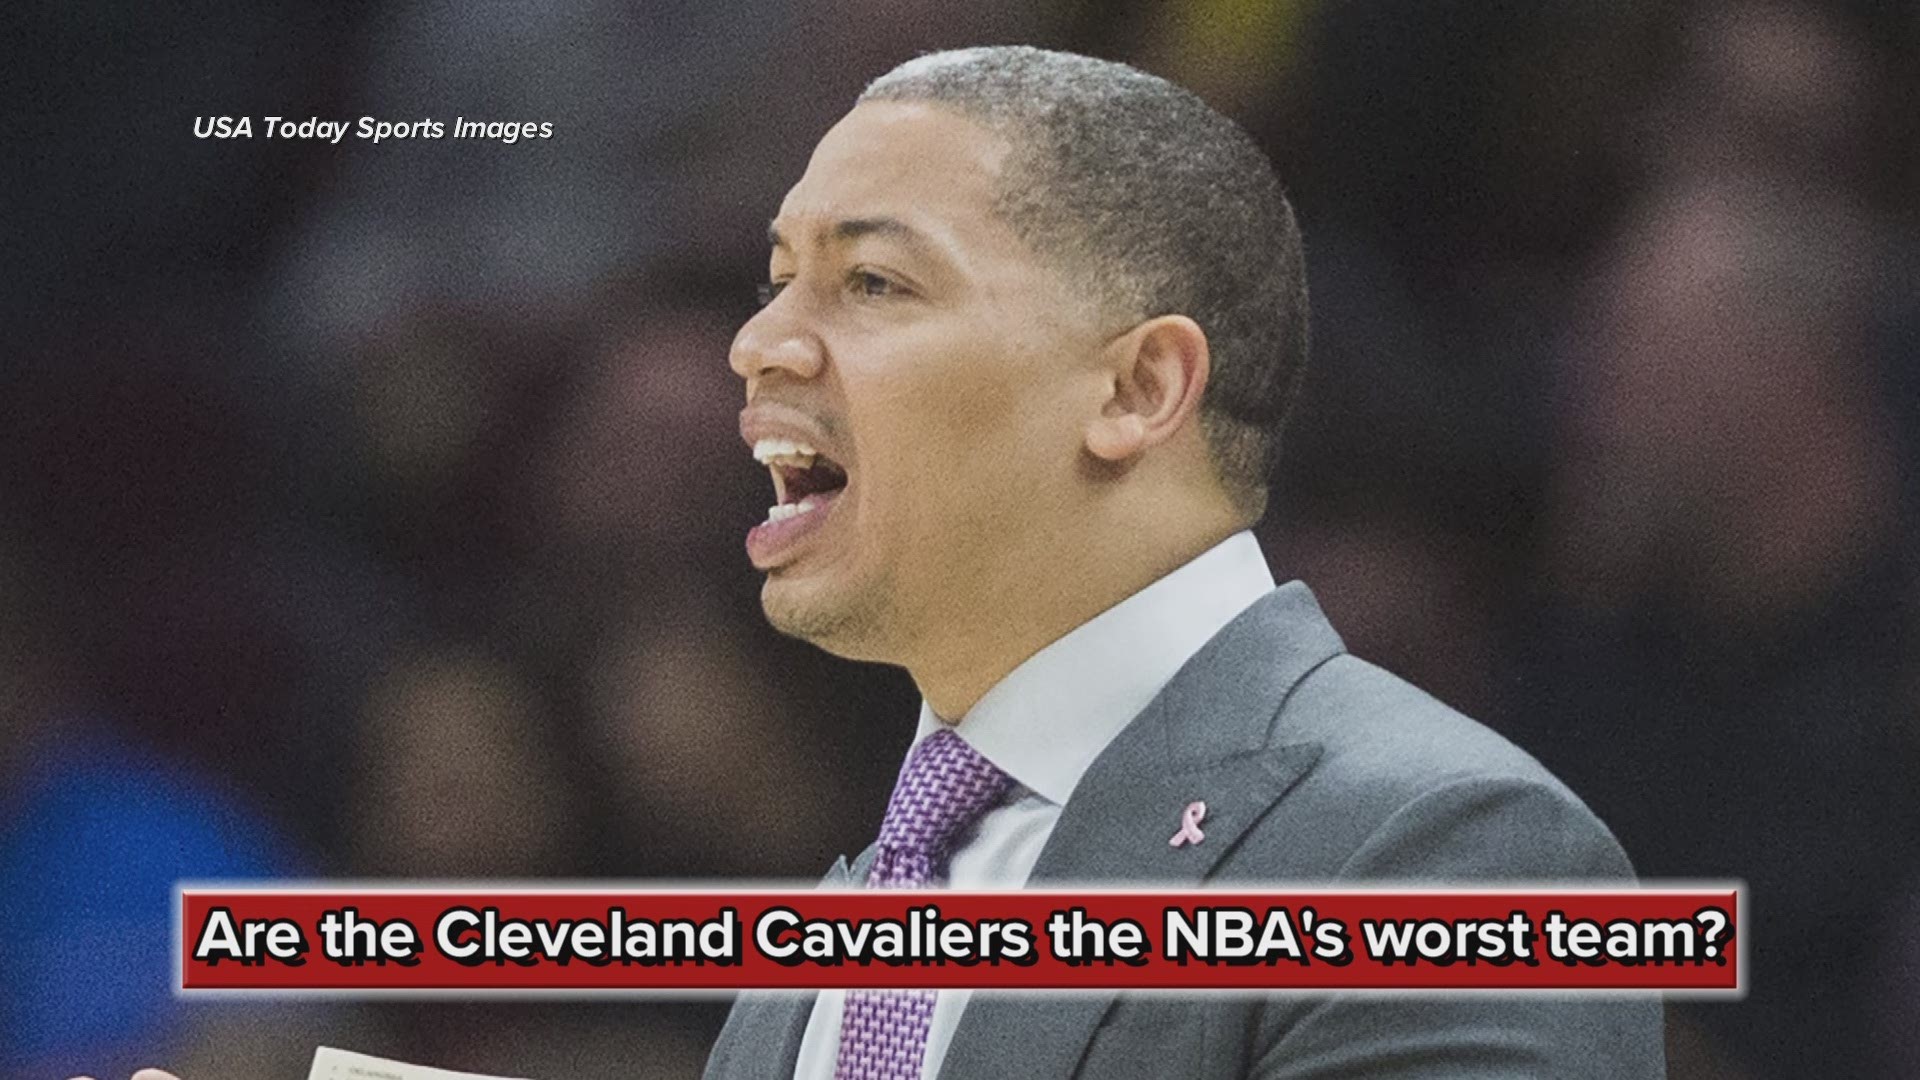 Are the Cleveland Cavaliers the NBA's worst team?